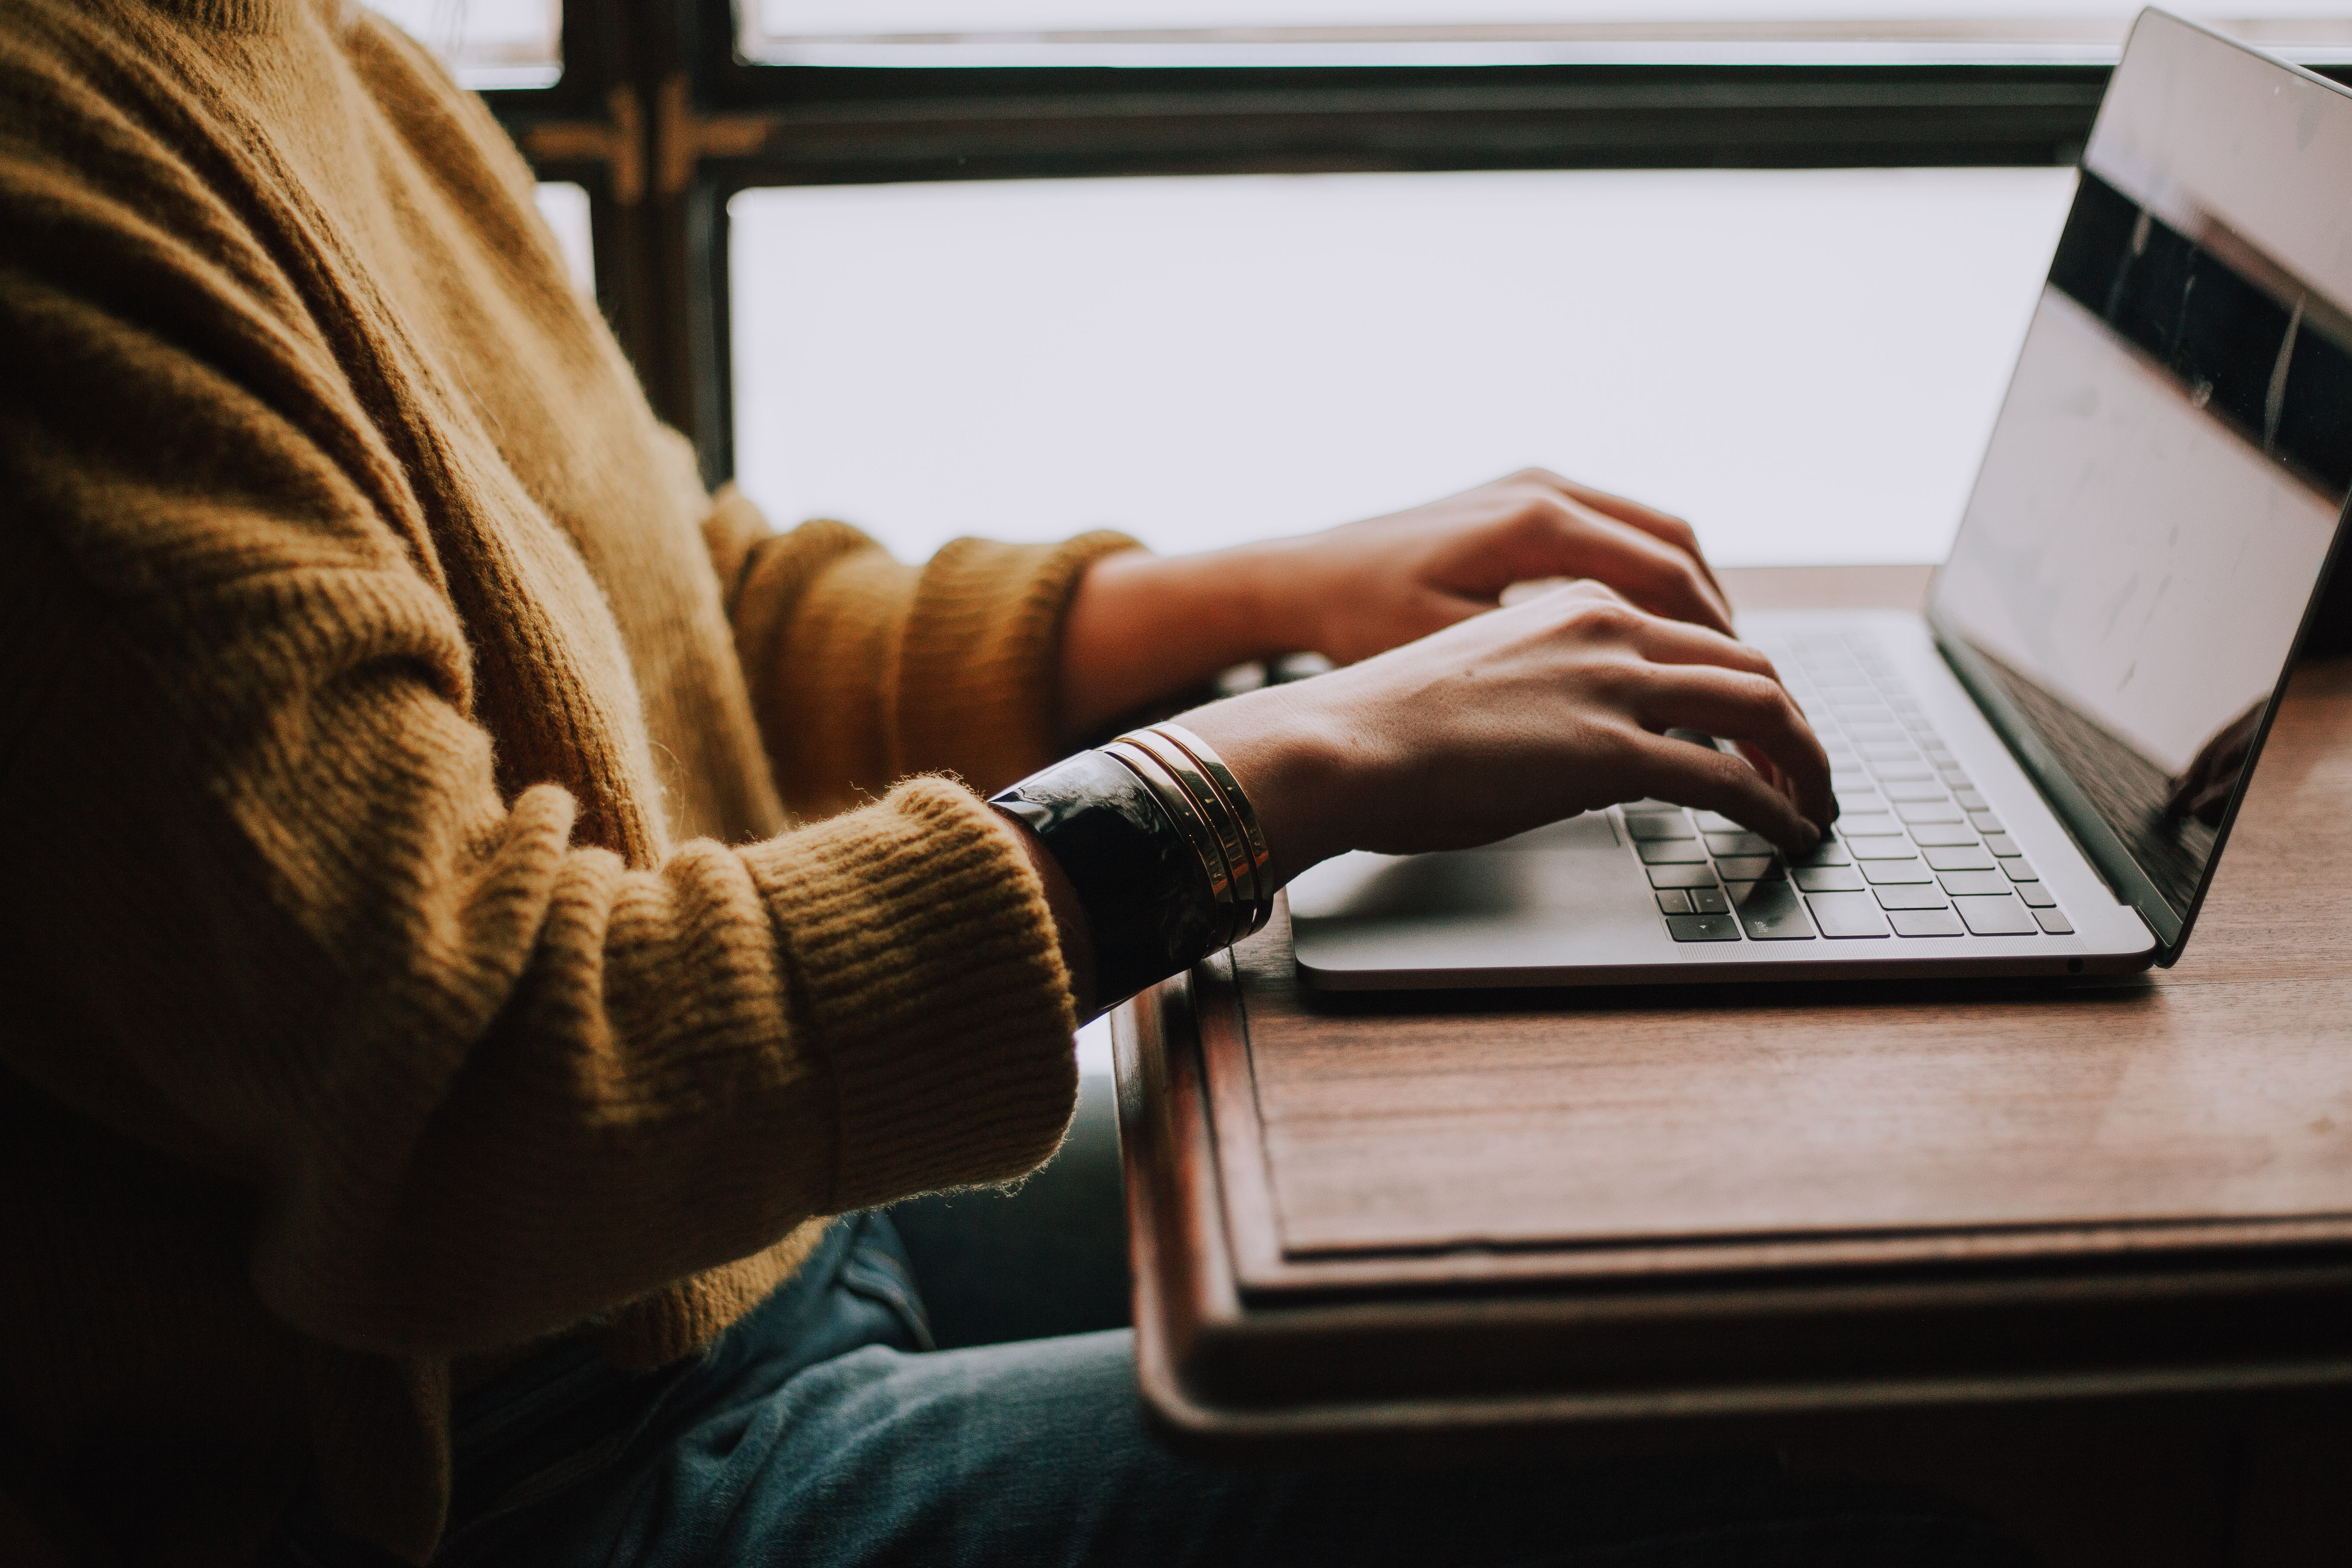 Photo by Christin Hume on Unsplash of a person sitting in front of a laptop.